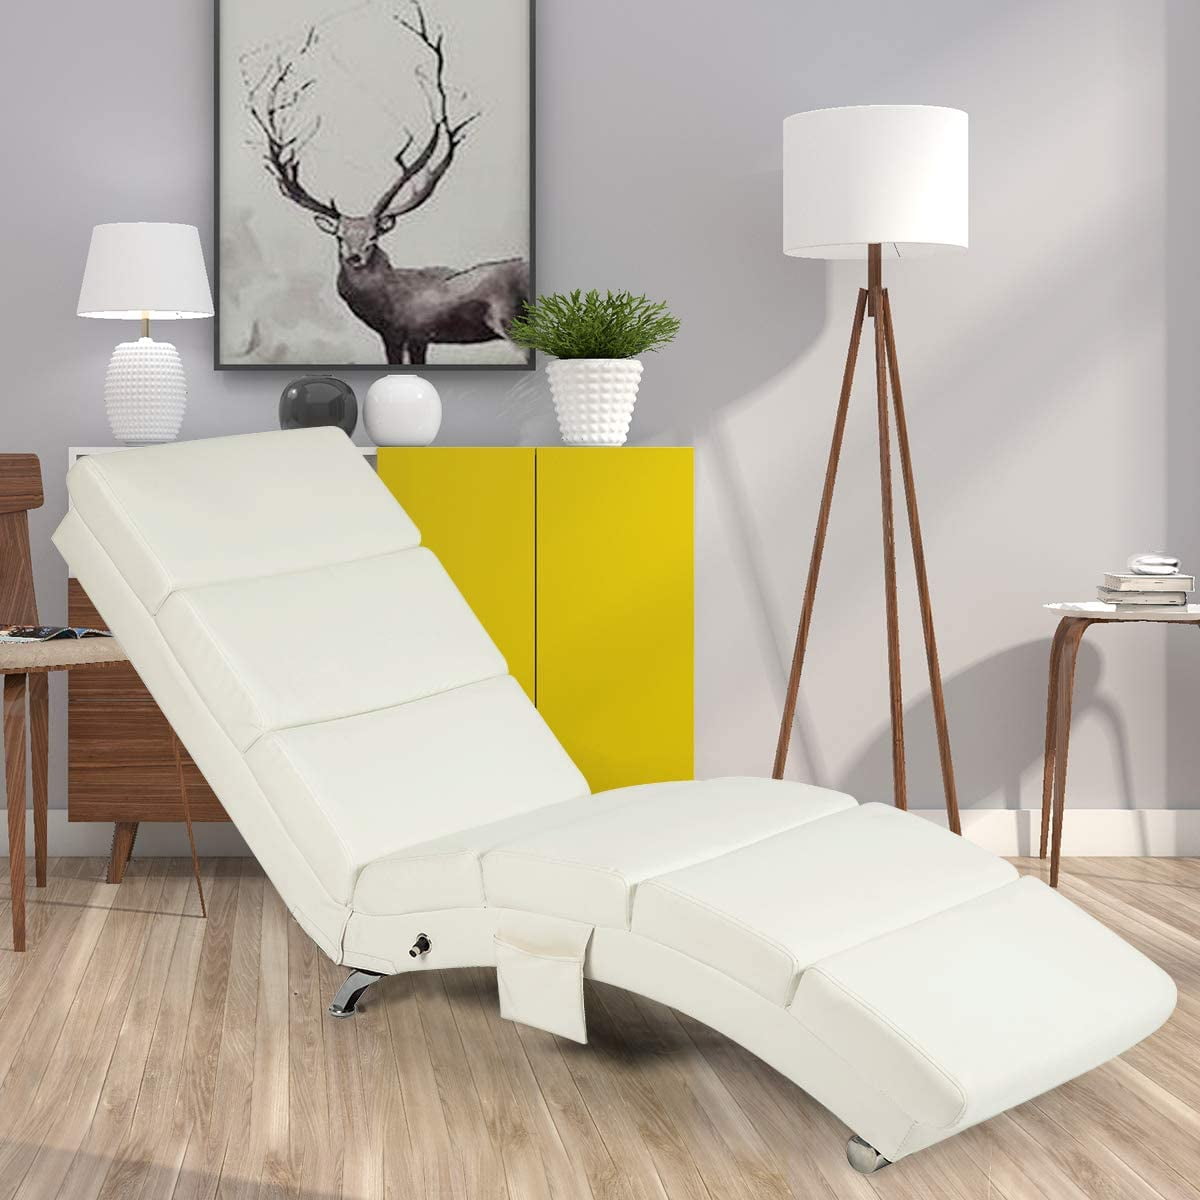 Erommy Synthetic Leather Chaise Longue with Massage Function,Massage Chair (White)